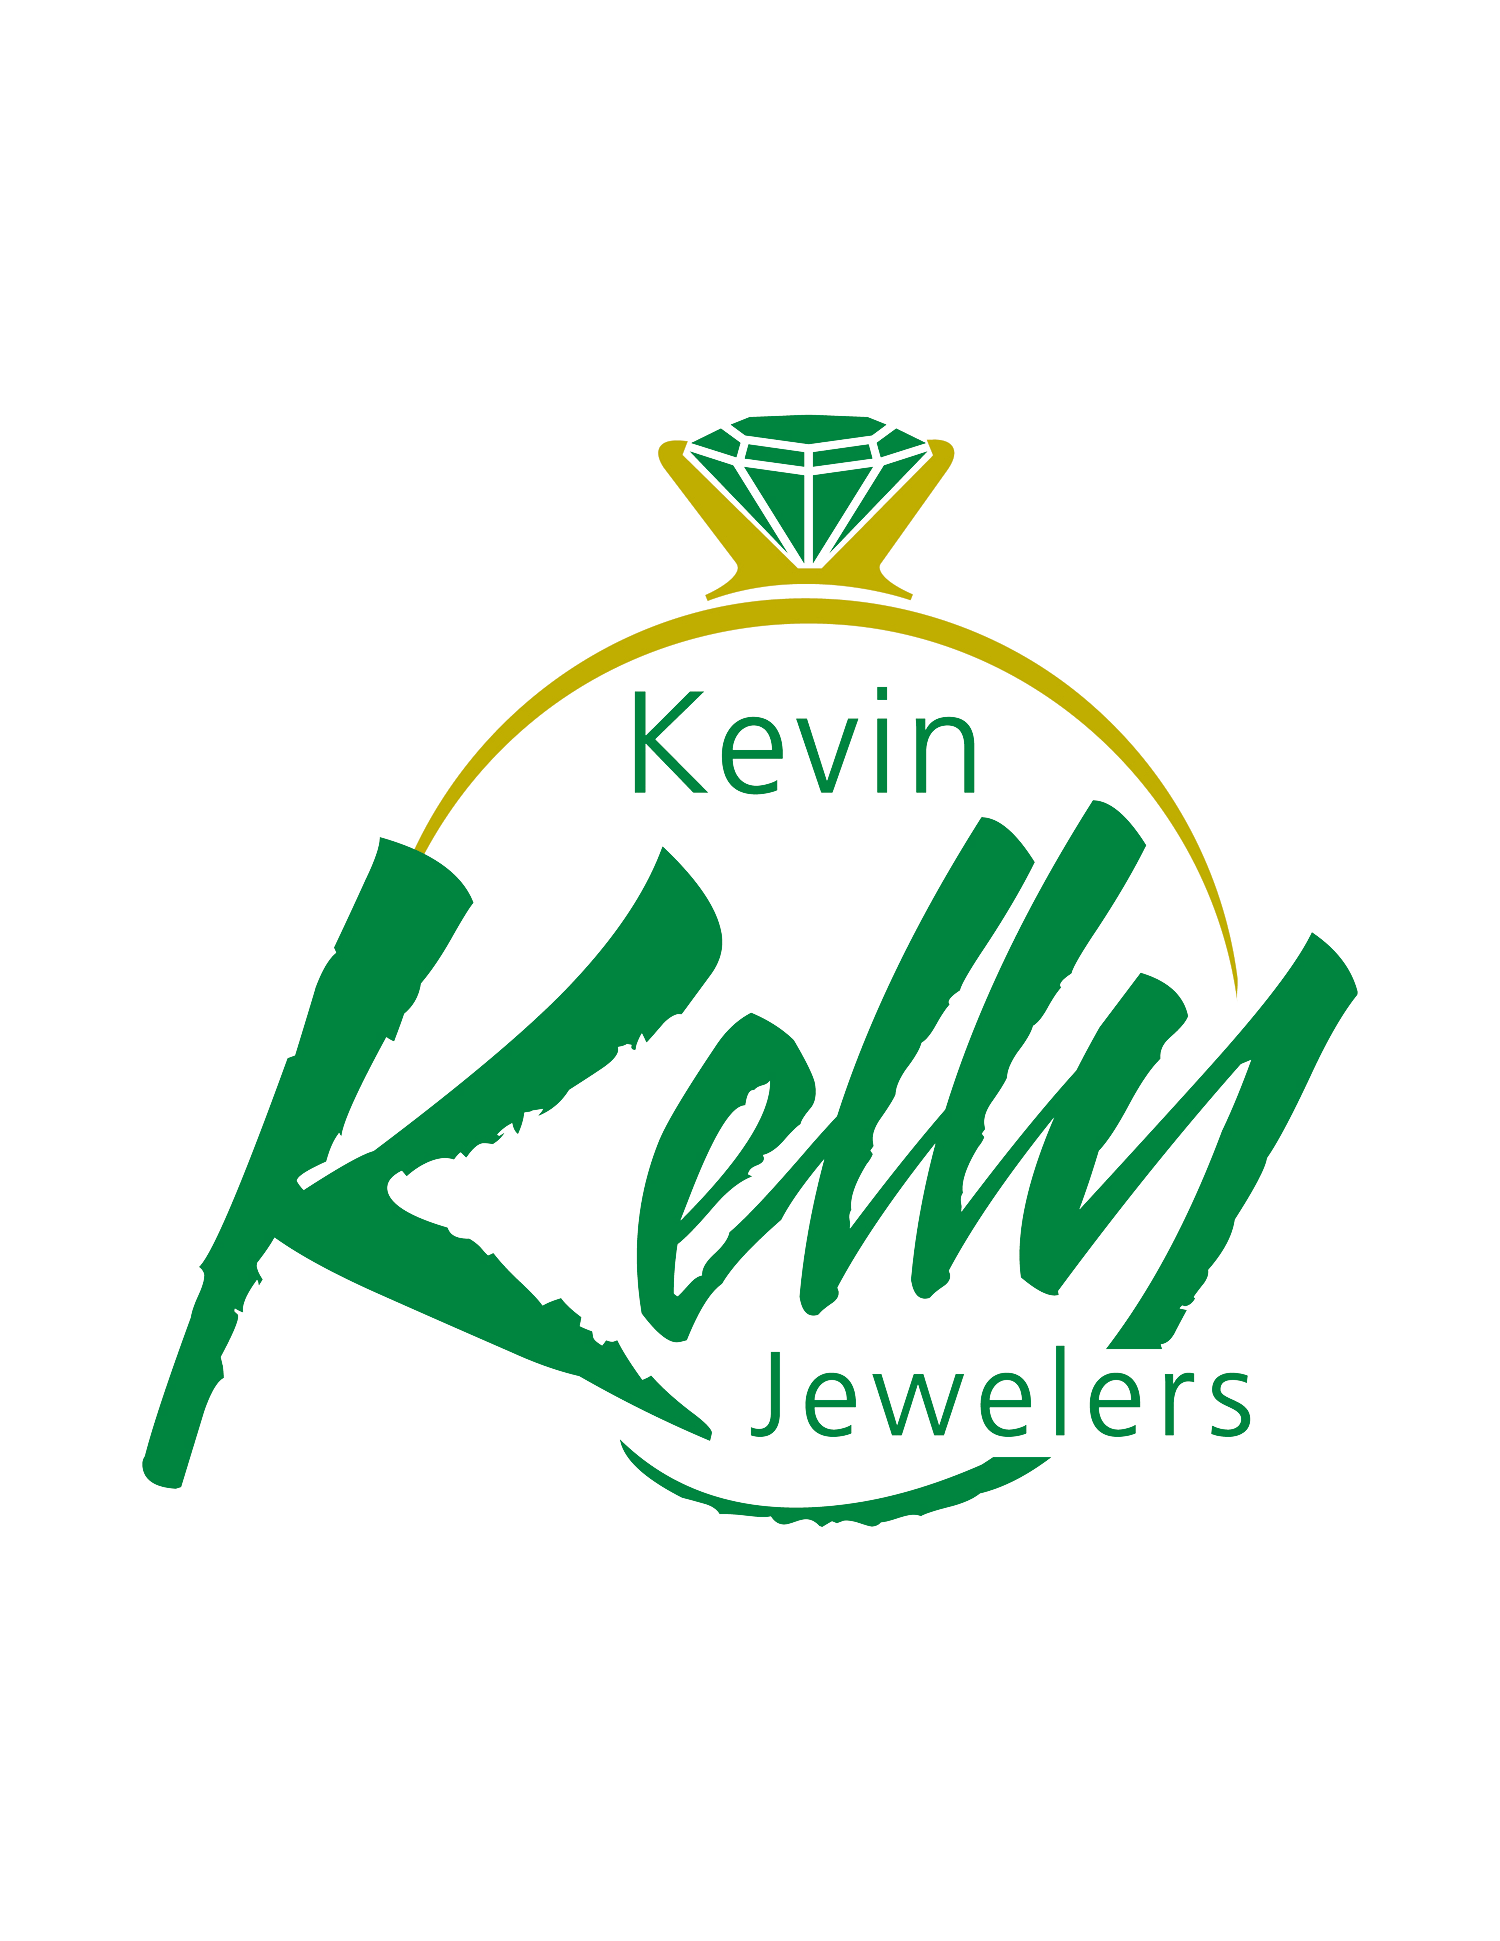 Location — Kevin Kelly Jewelers